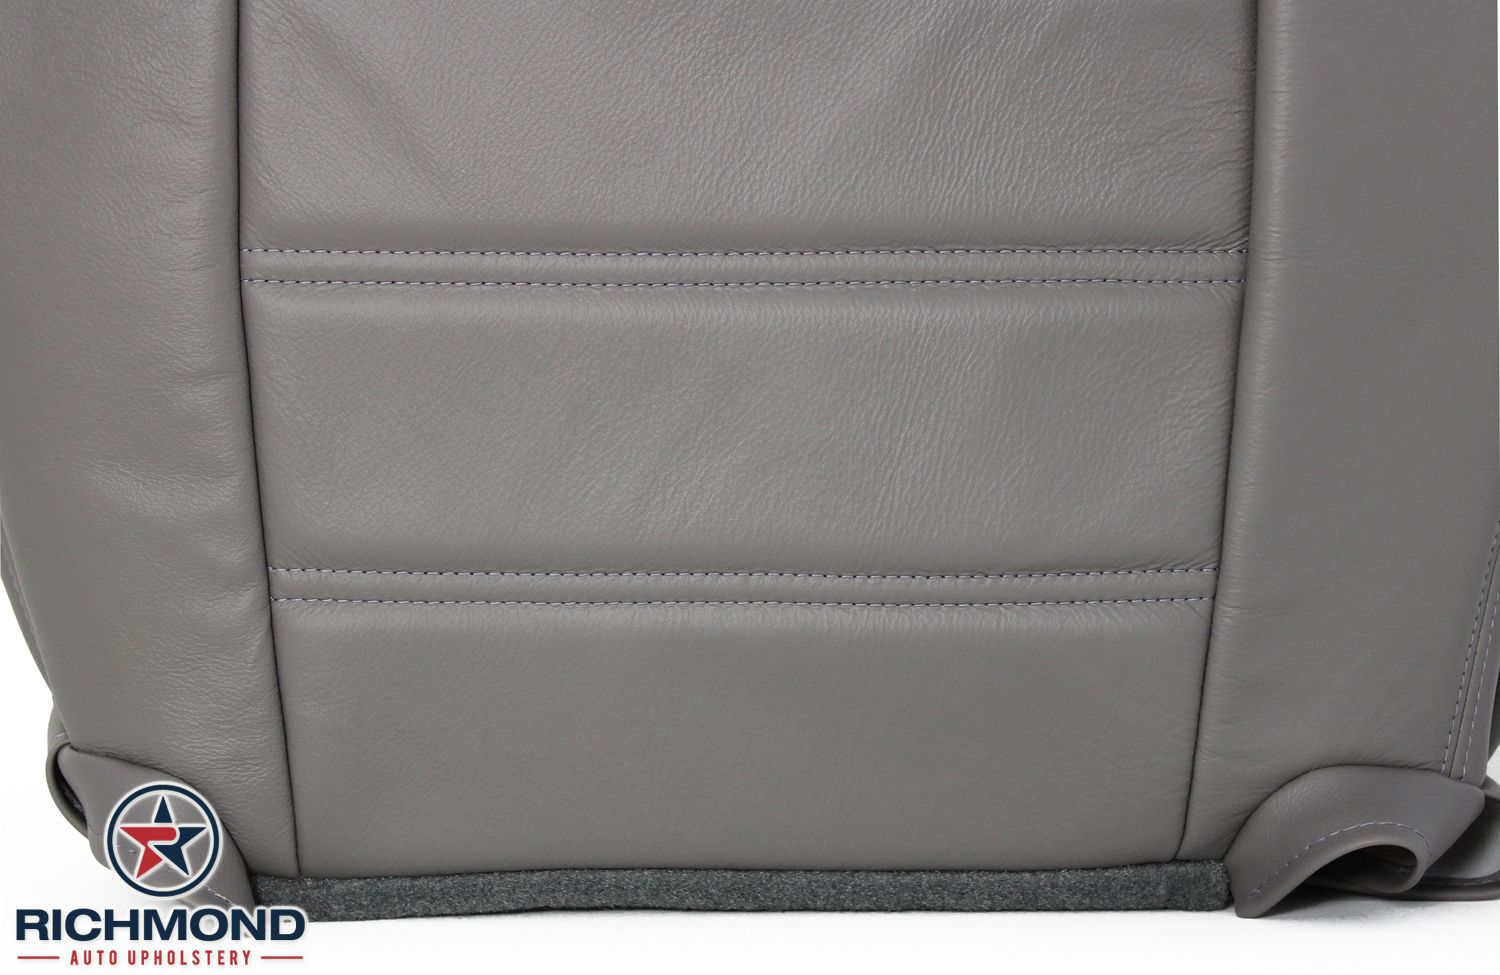 2005 Ford explorer replacement seats #10